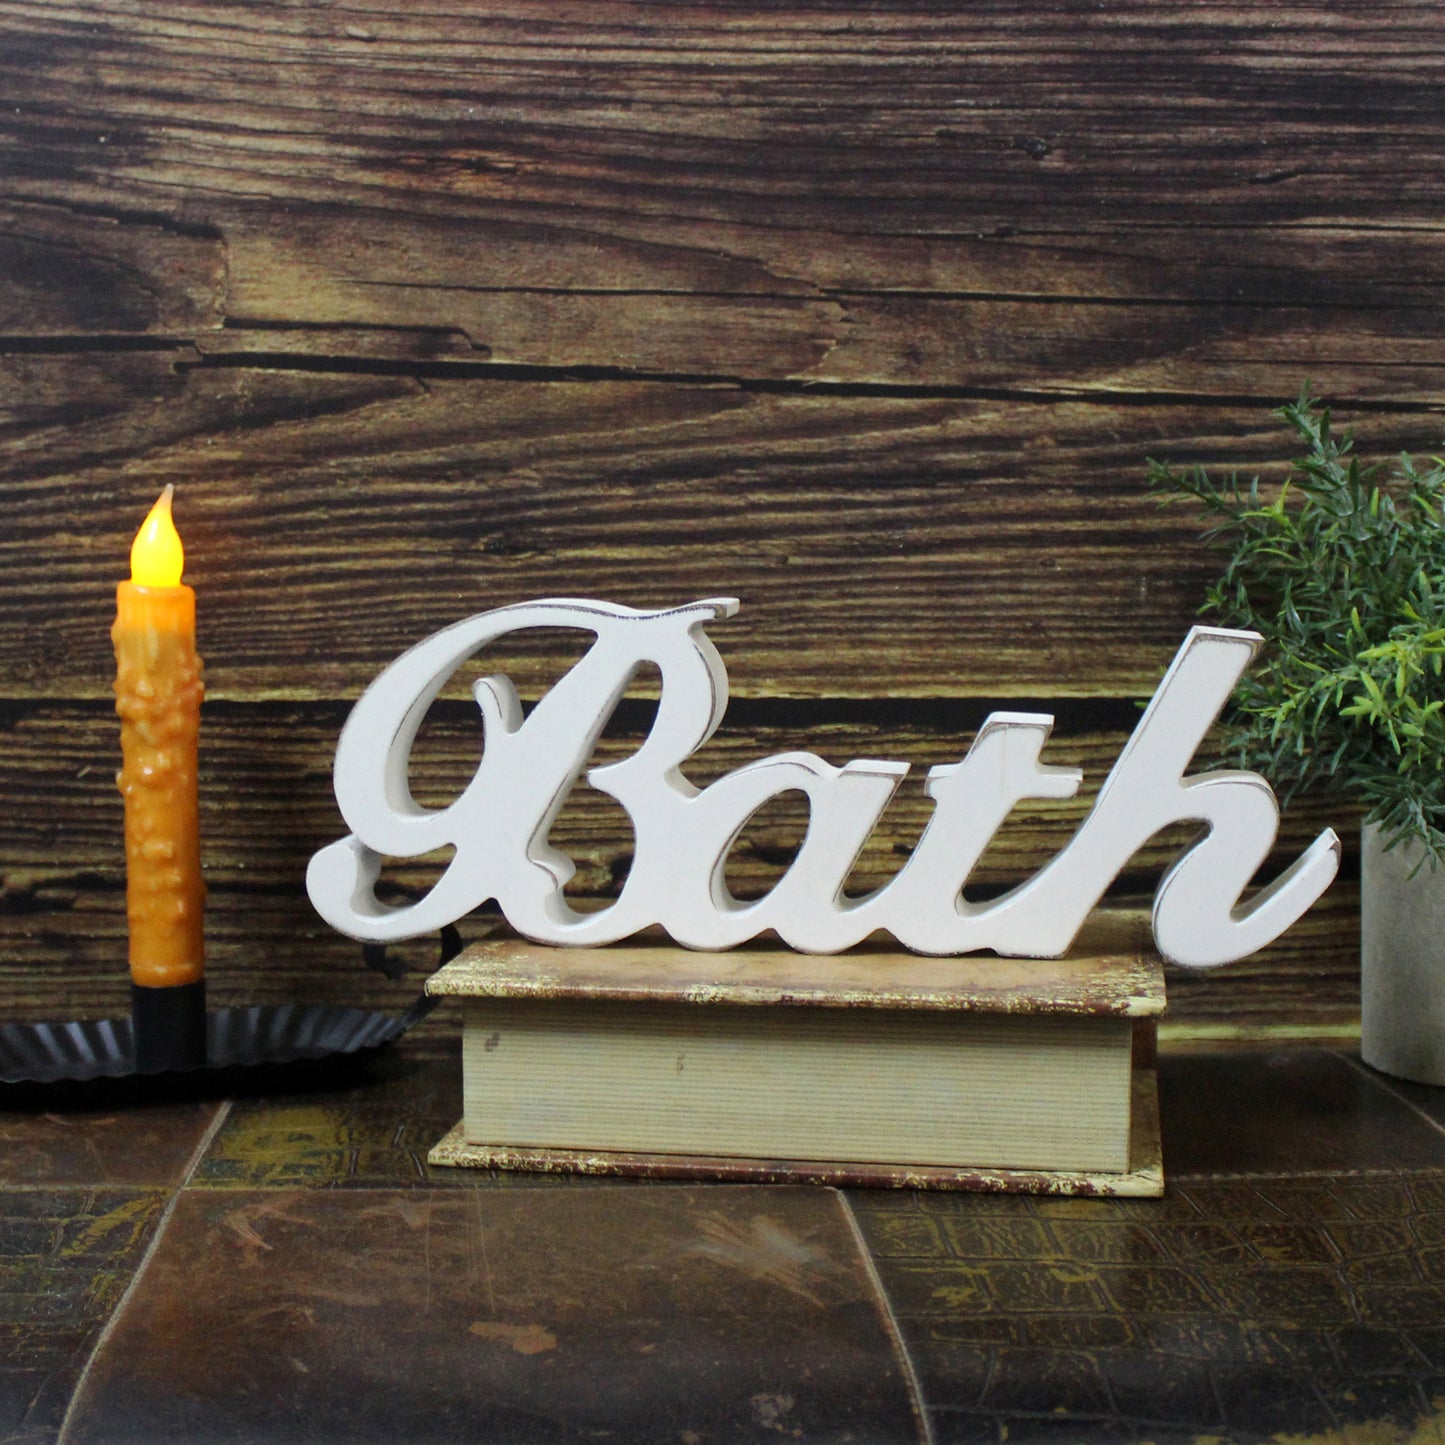 CVHOMEDECO. Rustic Vintage Wooden Words Sign Free Standing Bath, Bathroom/Home Wall/Door Decoration Art (Distressed White 1)